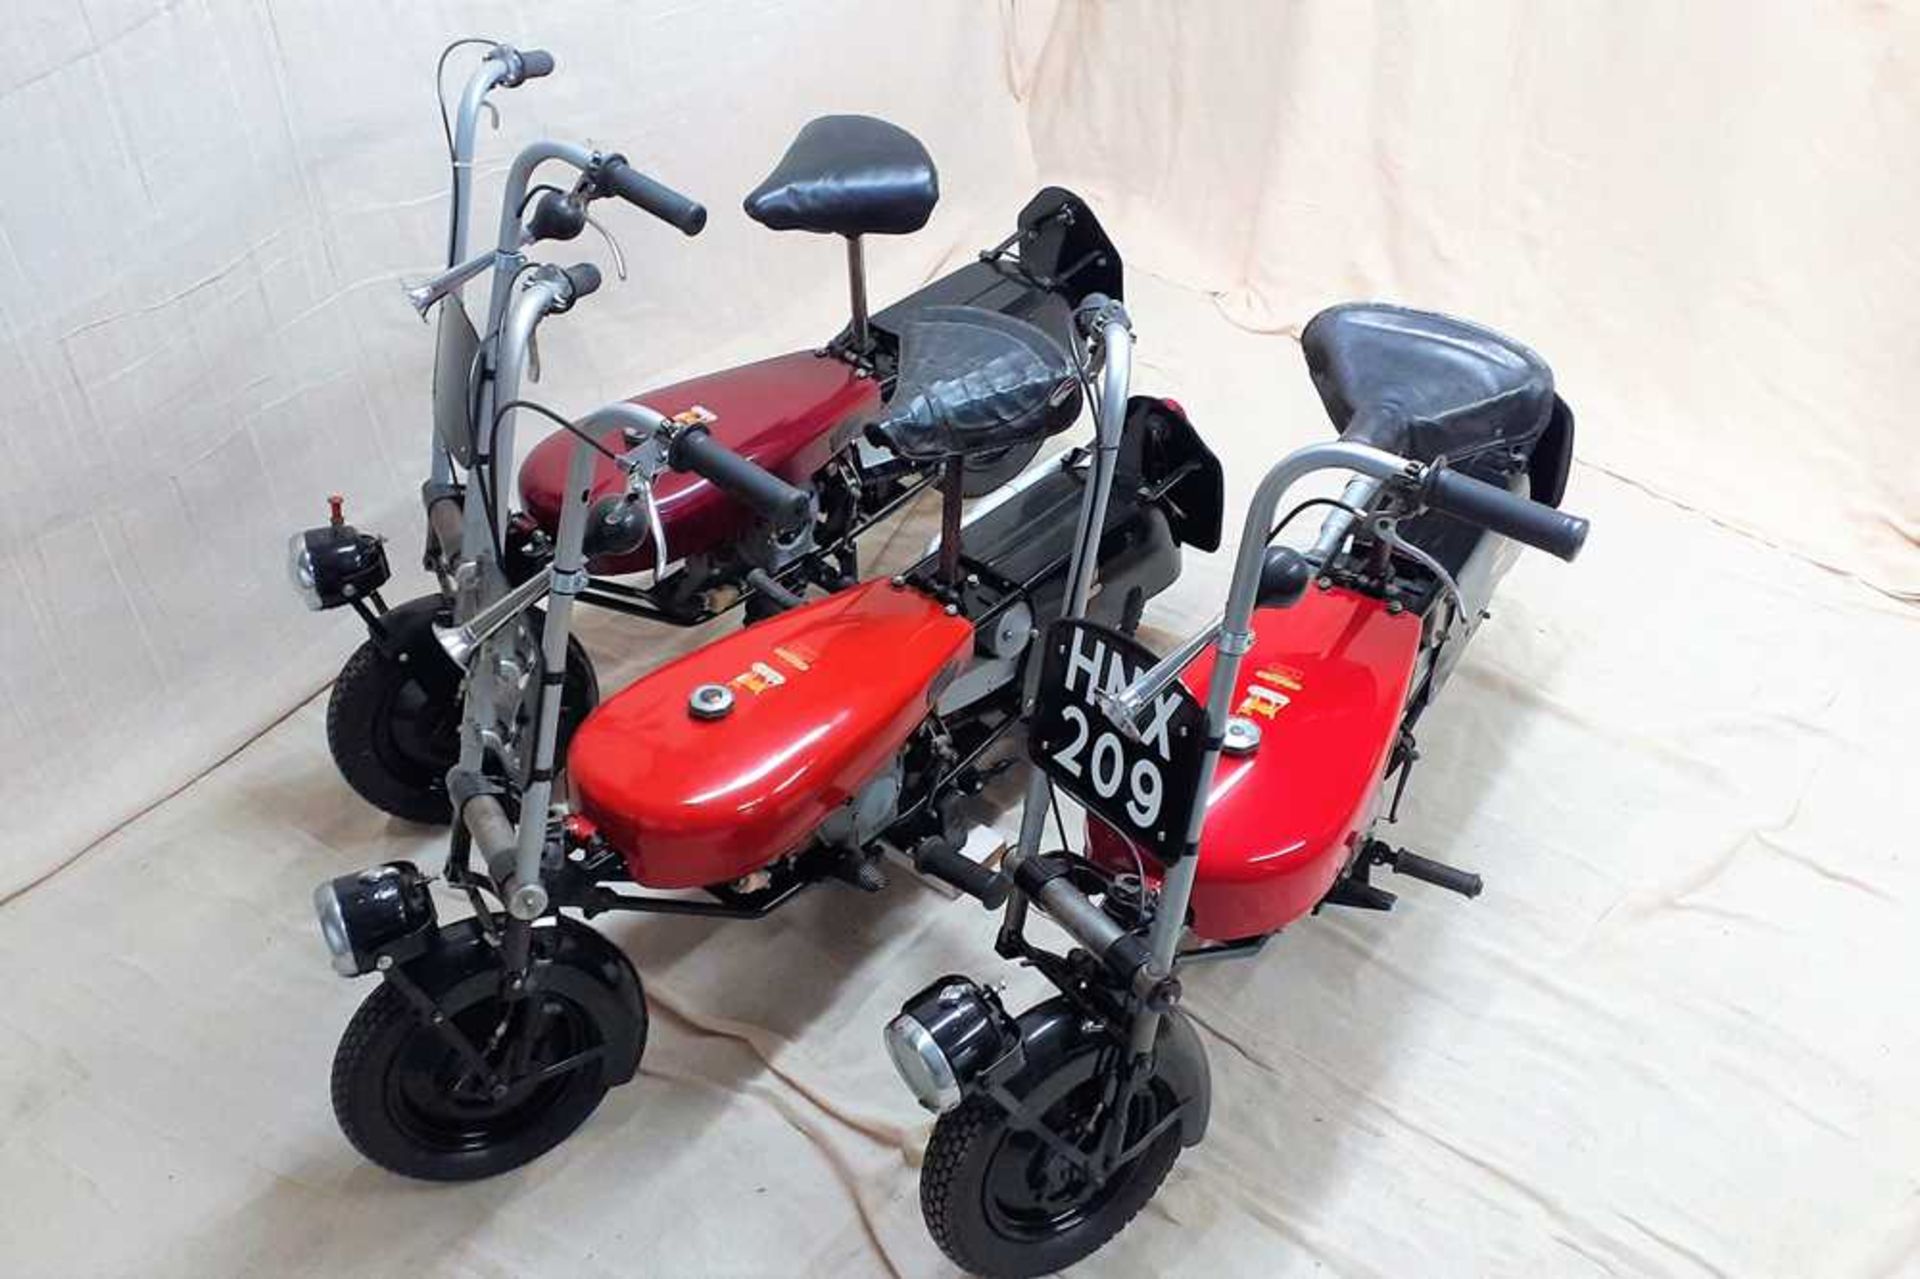 3x Corgi Motorcycles All are to be sold as one LOT - Image 2 of 30